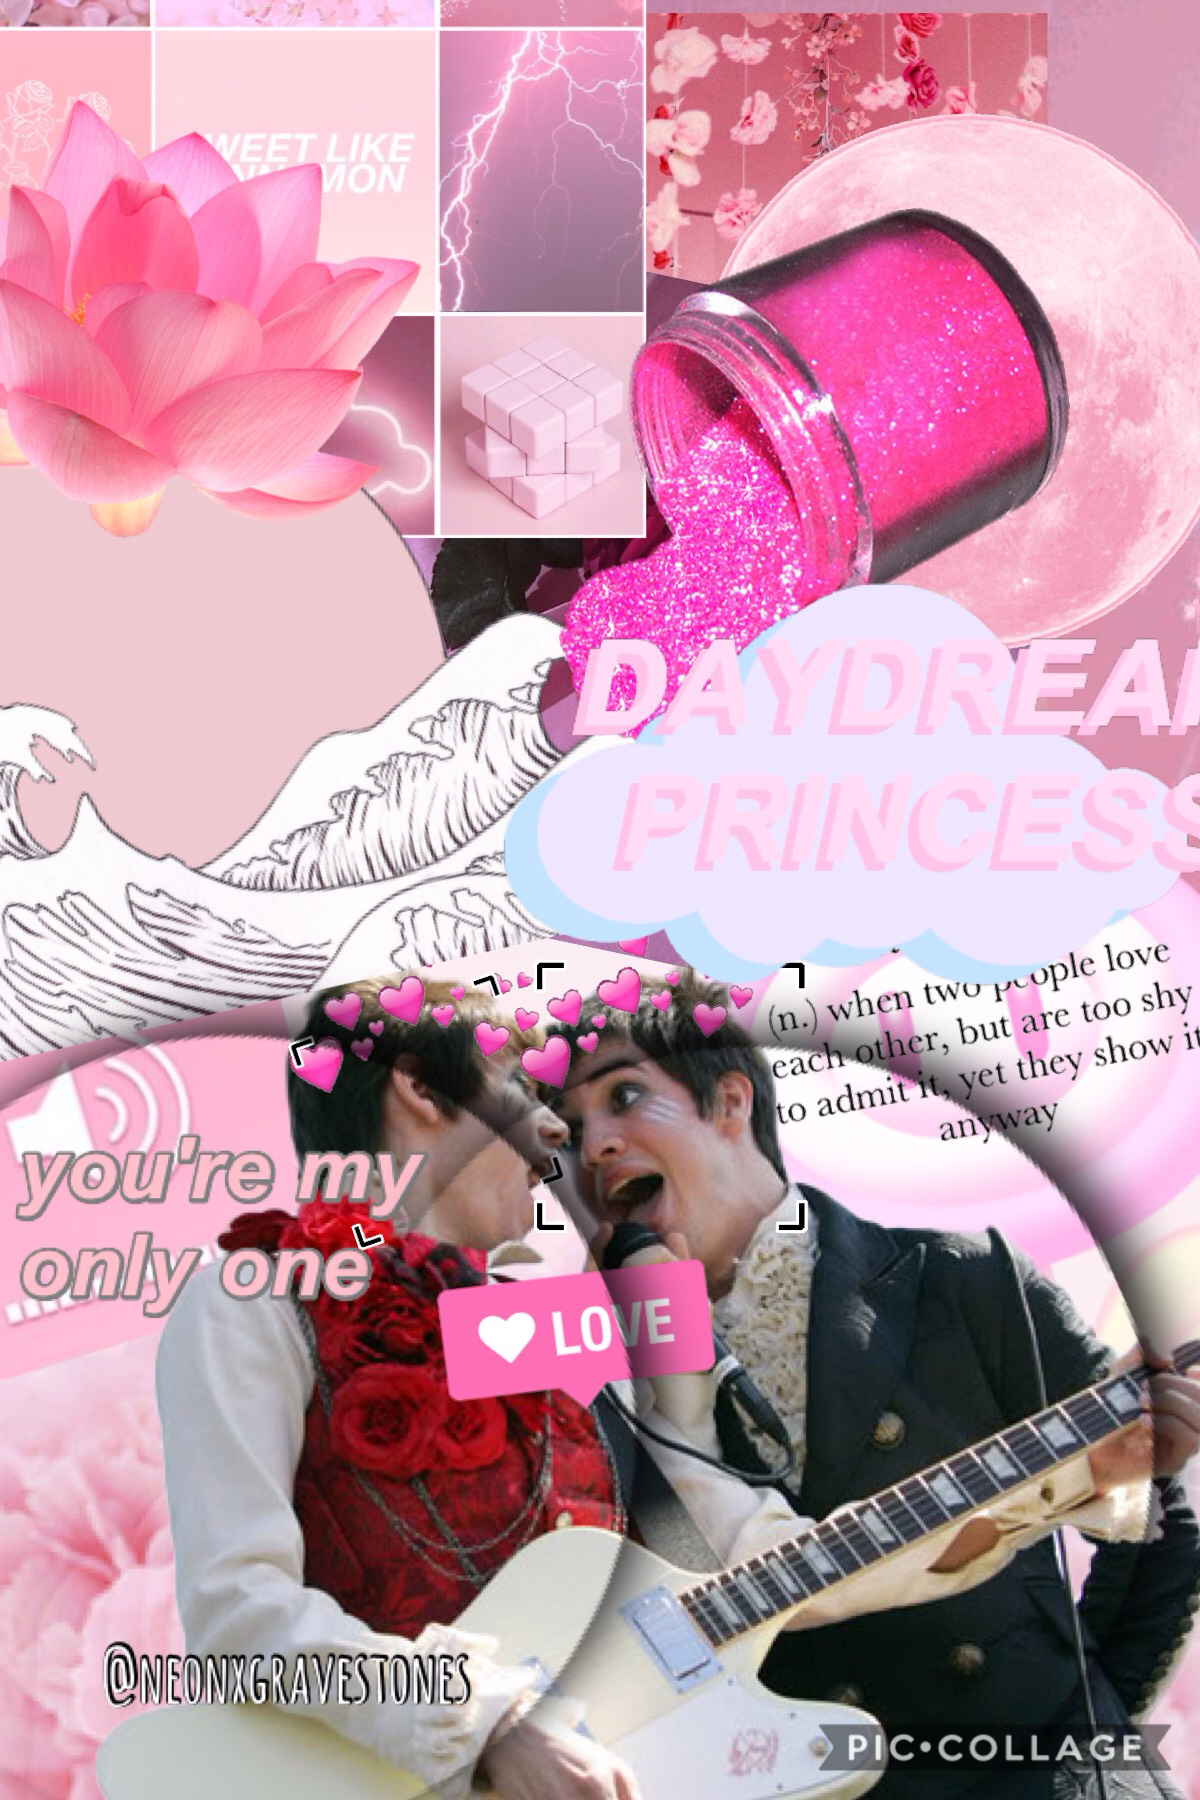 Happy Valentines Day! This is my first Ryden collage. More collages coming soon today!